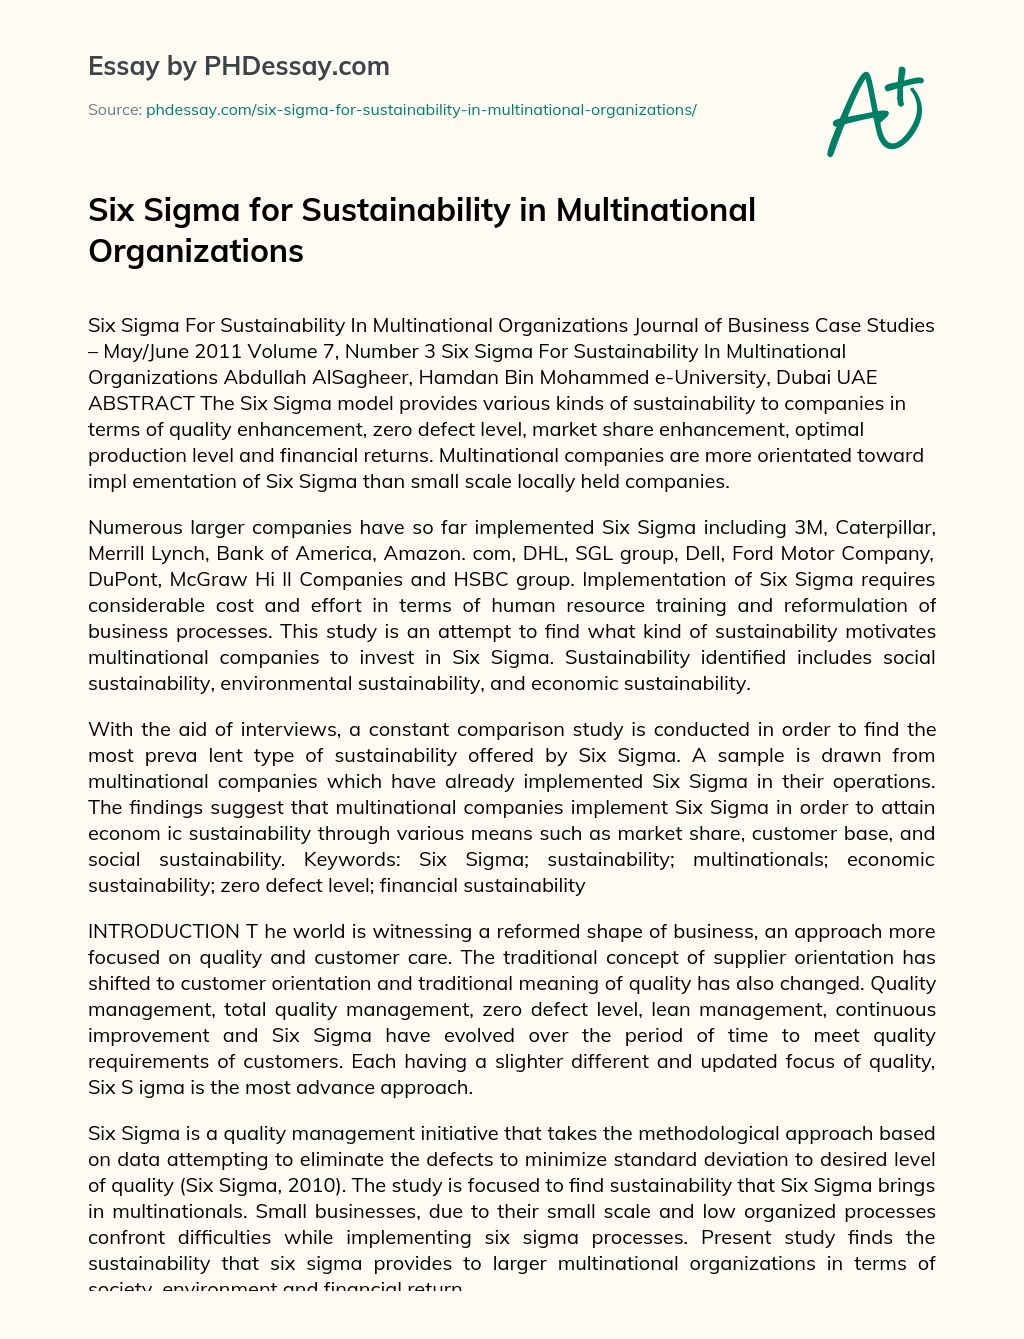 Six Sigma for Sustainability in Multinational Organizations essay